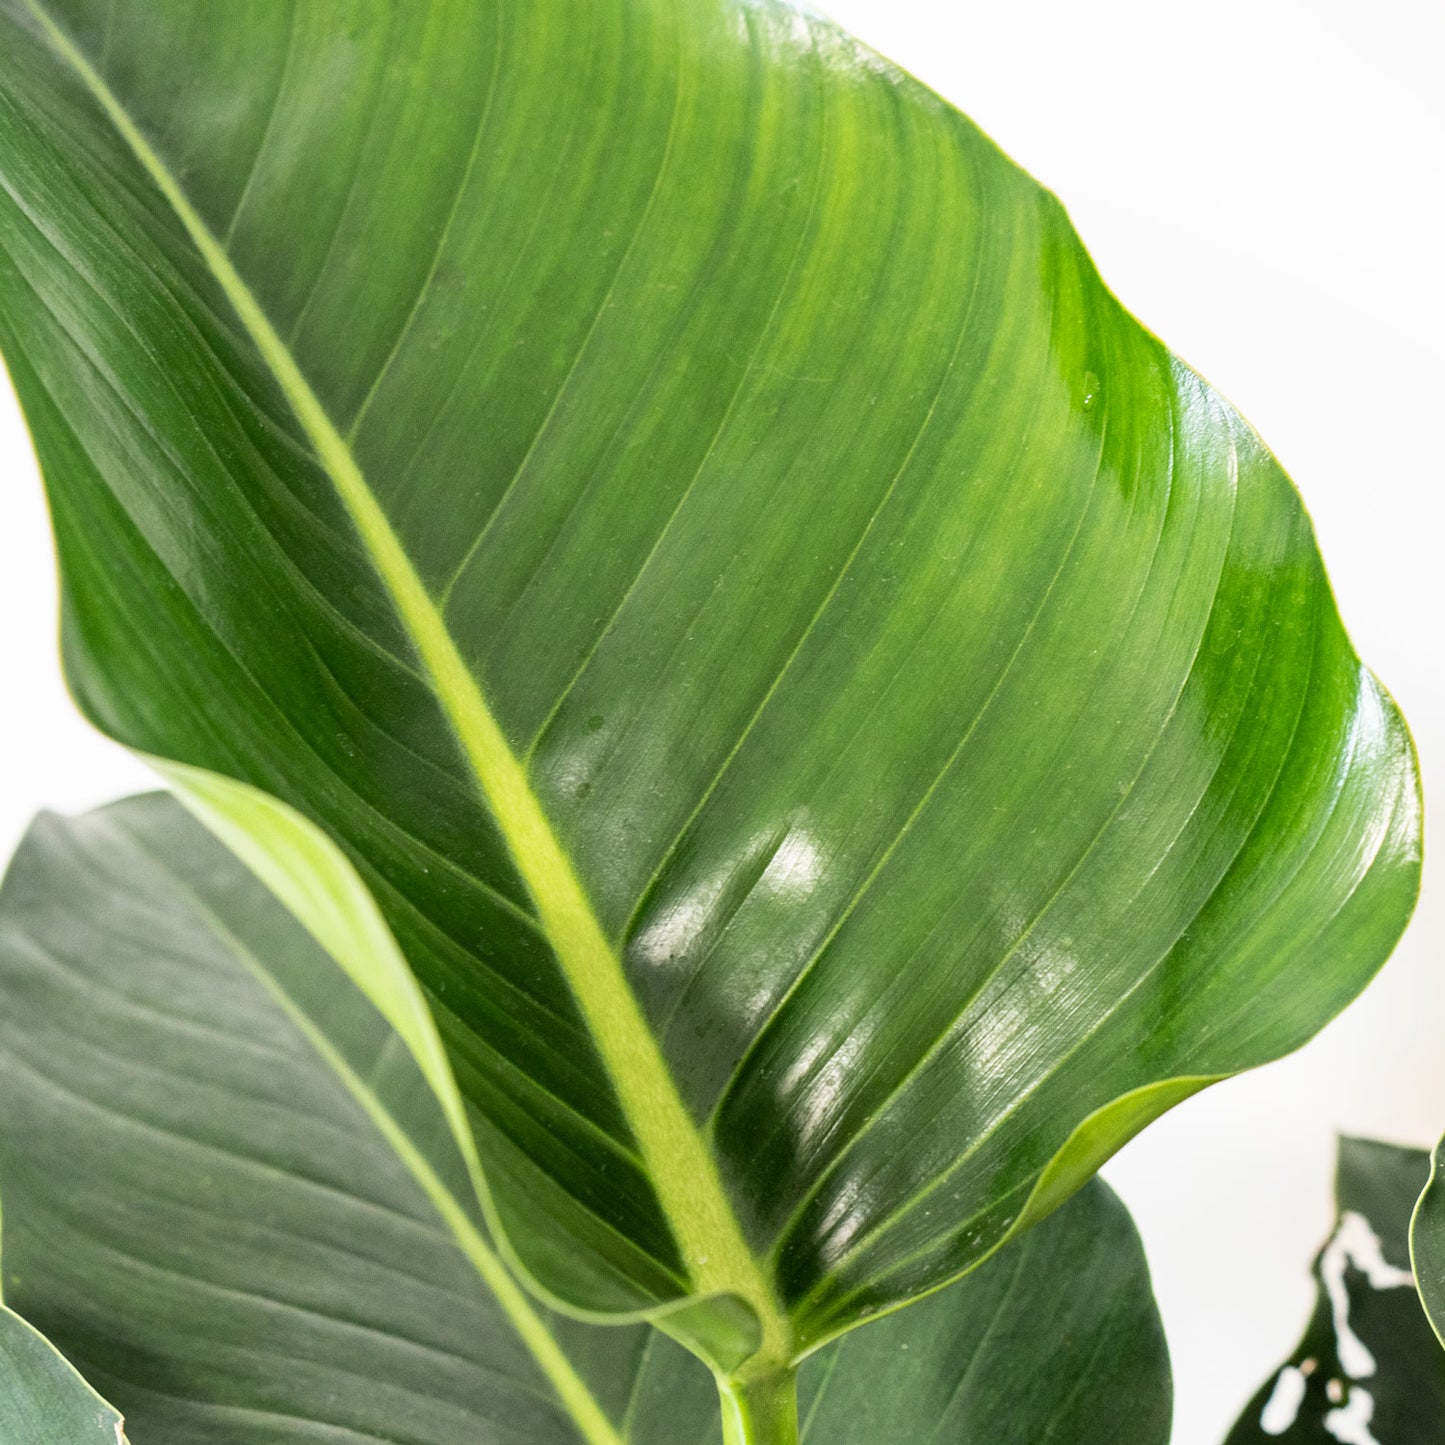 Leaves of Potted Easy-Care Houseplant Phillodendron Congo 10” - Buy large repotted easy-care indoor plant Philodendron Congo for delivery at Planteia